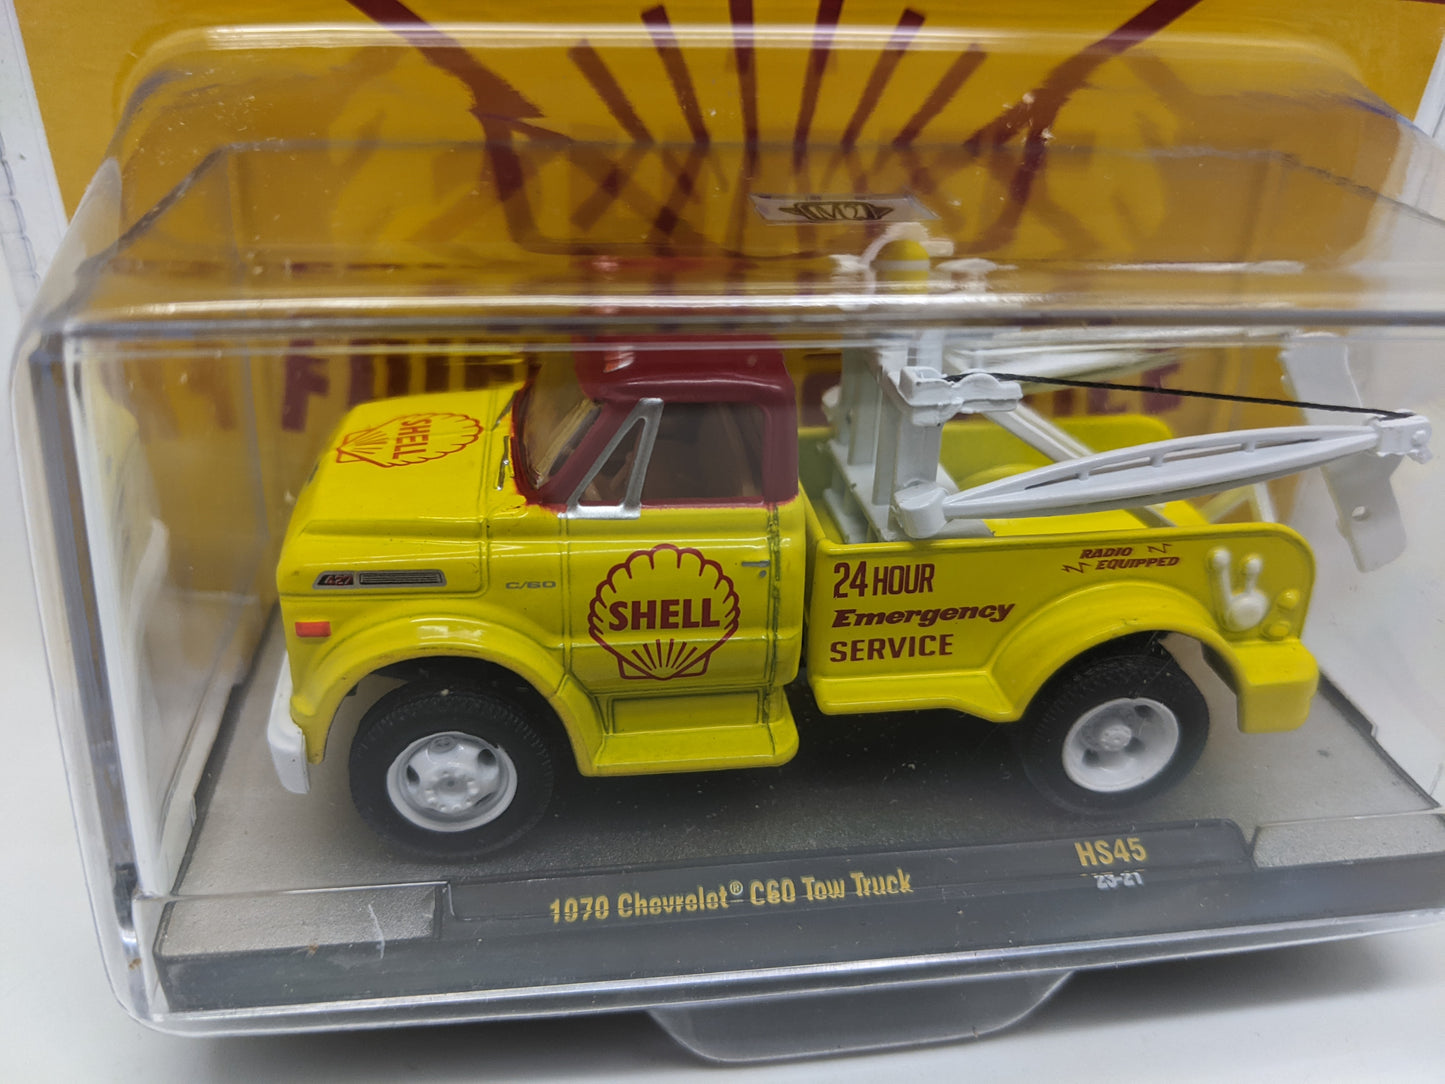 M2 1970 Chevy C60 Tow Truck -Shell